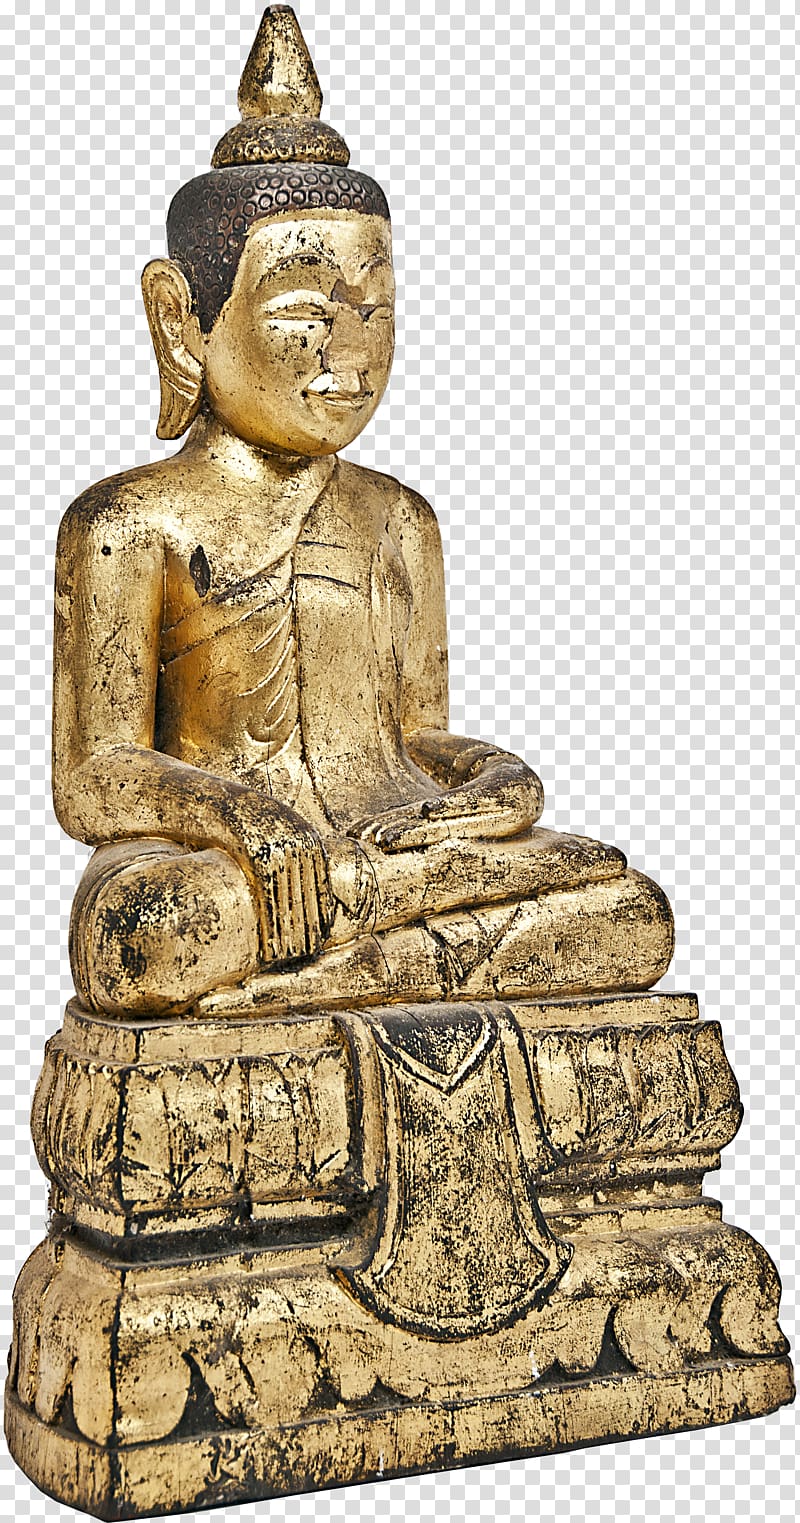 Archaeological site Statue Artifact 01504 Bronze, others transparent background PNG clipart